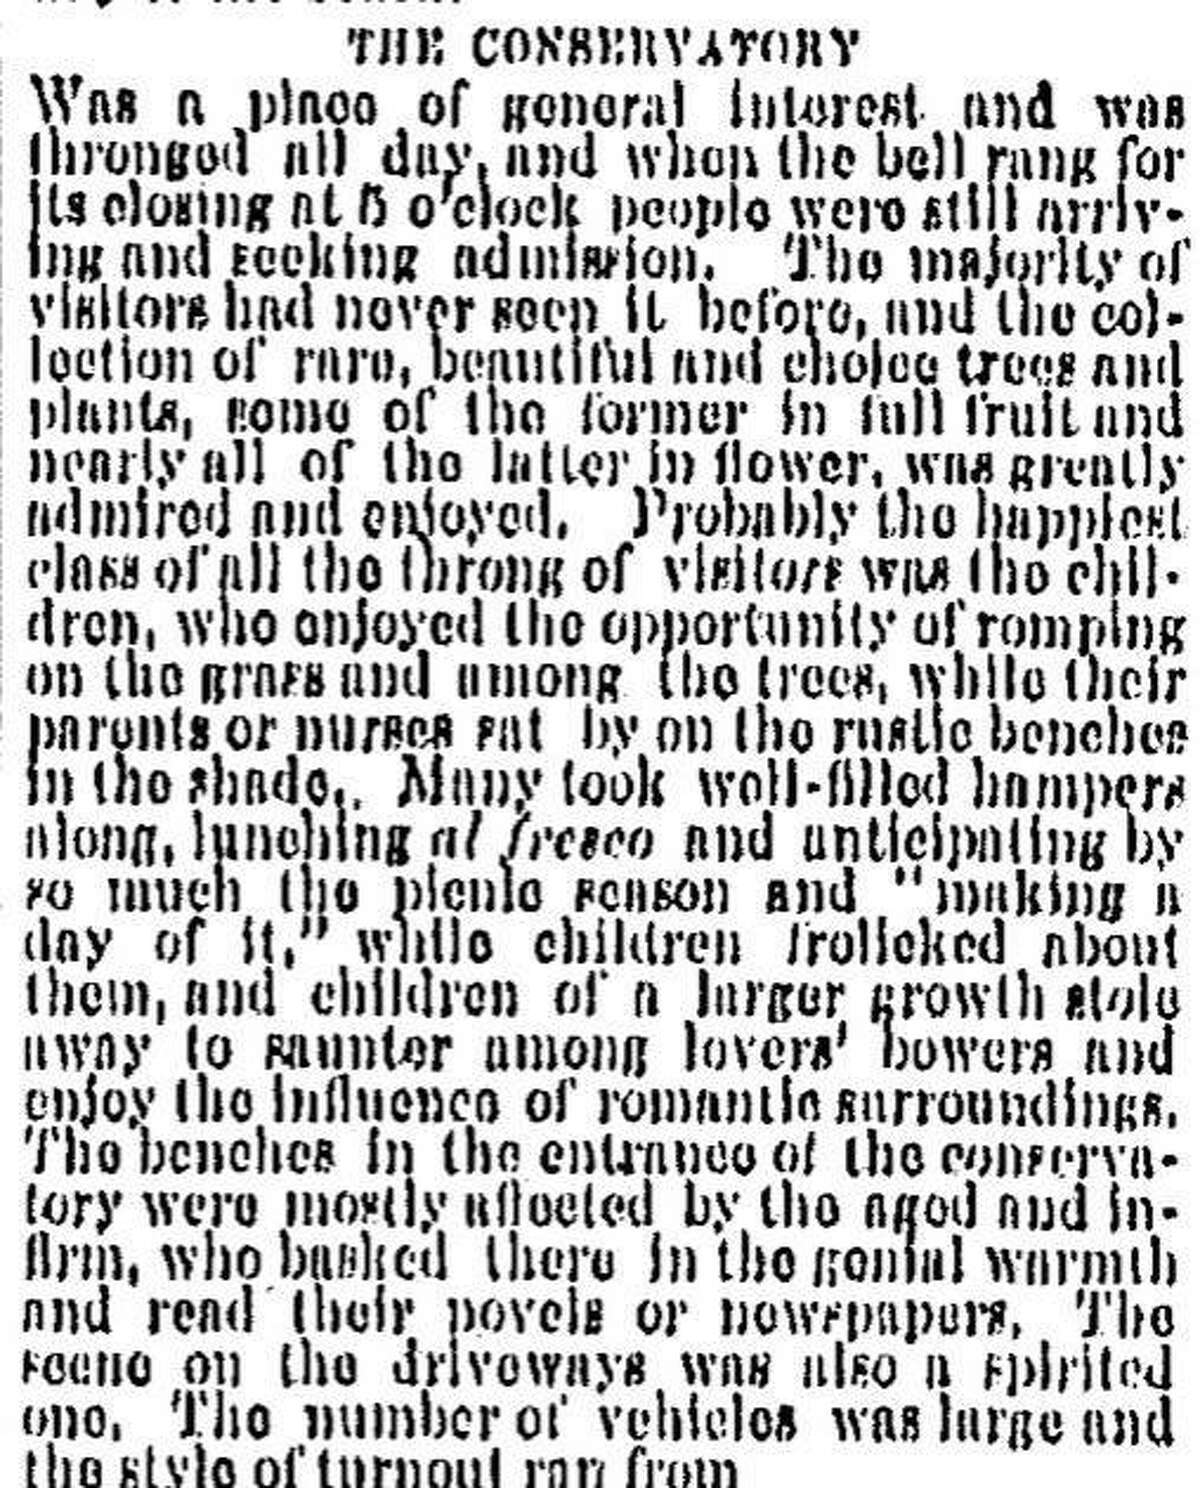 A Chronicle story about a leisurely day at the Conservatory of Flowers as well as Golden Gate Park, February 29, 1880